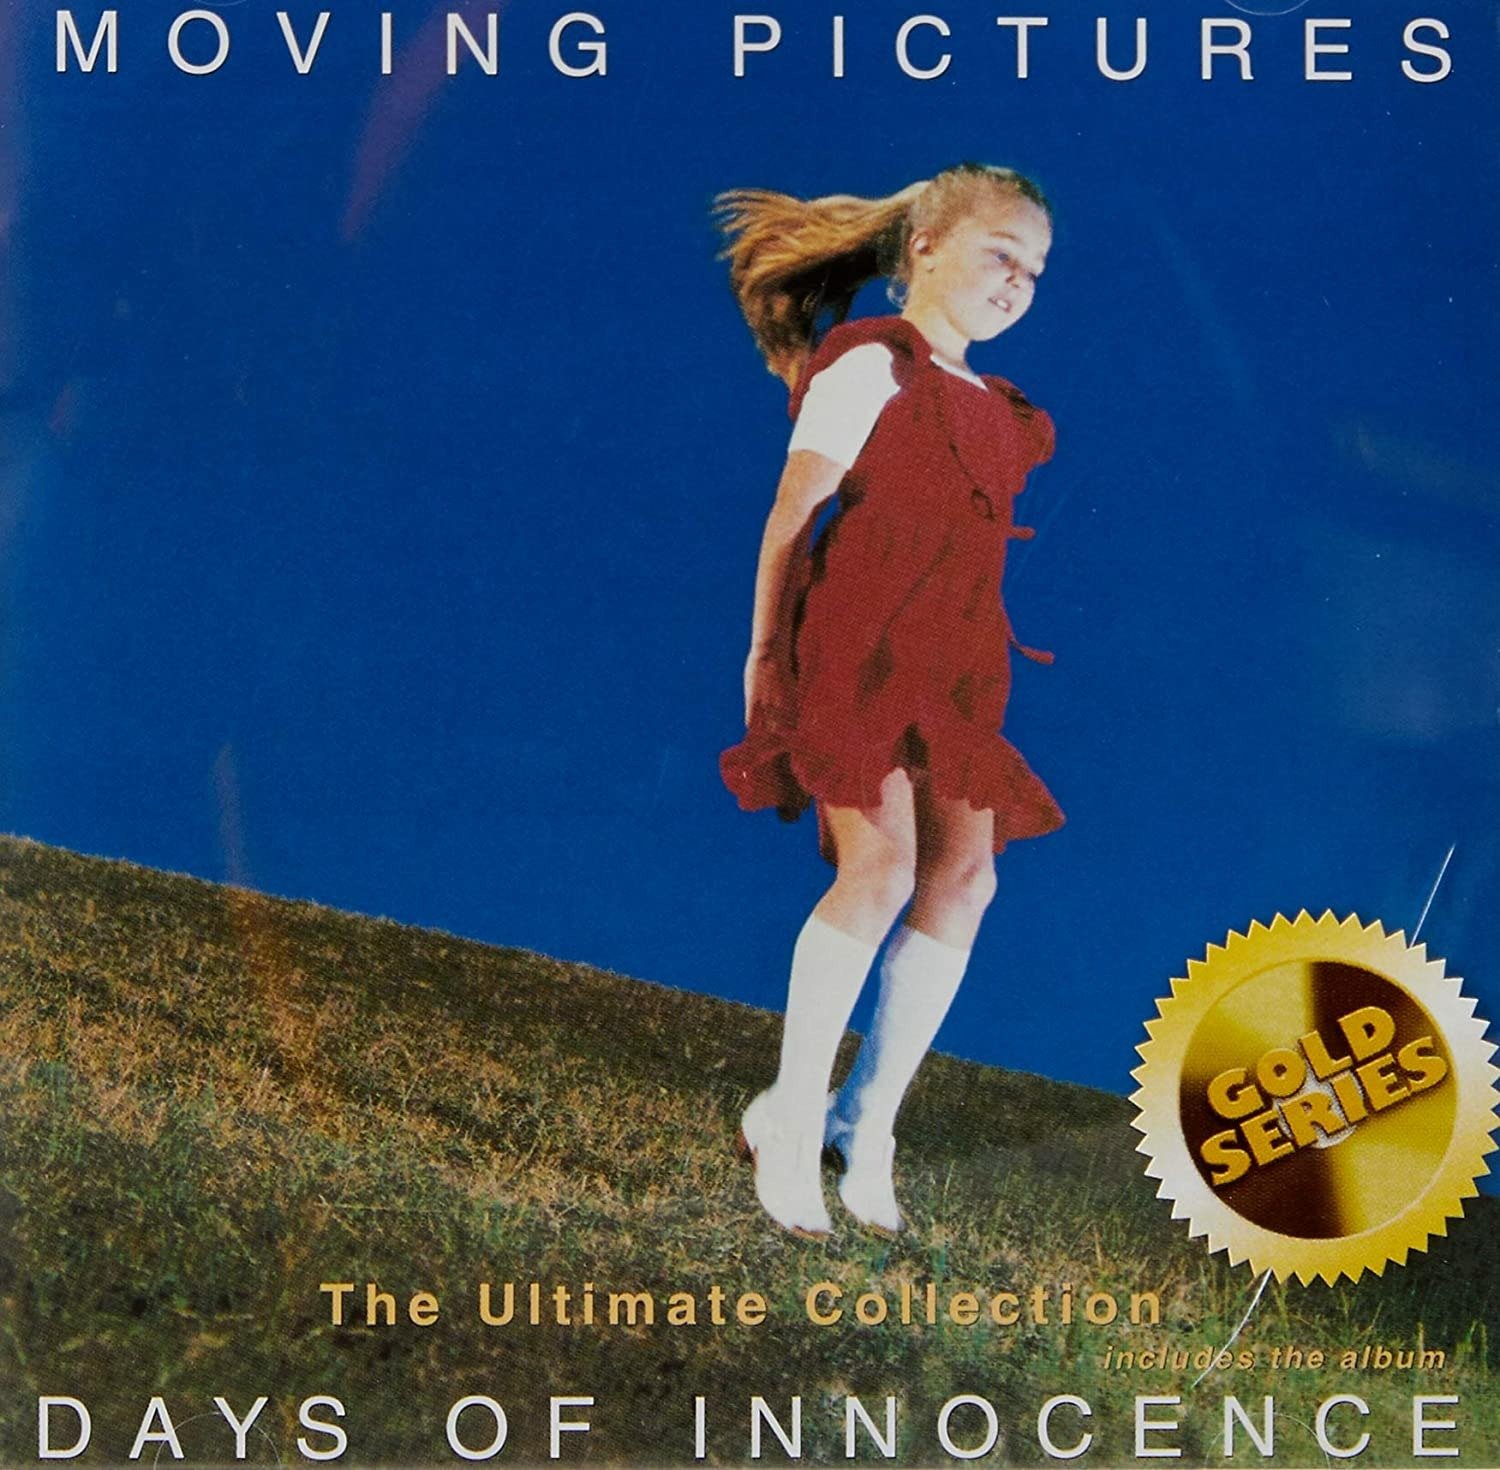 CD Shop - MOVING PICTURES DAYS OF INNOCENCE - ULTIMATE COLLECTION